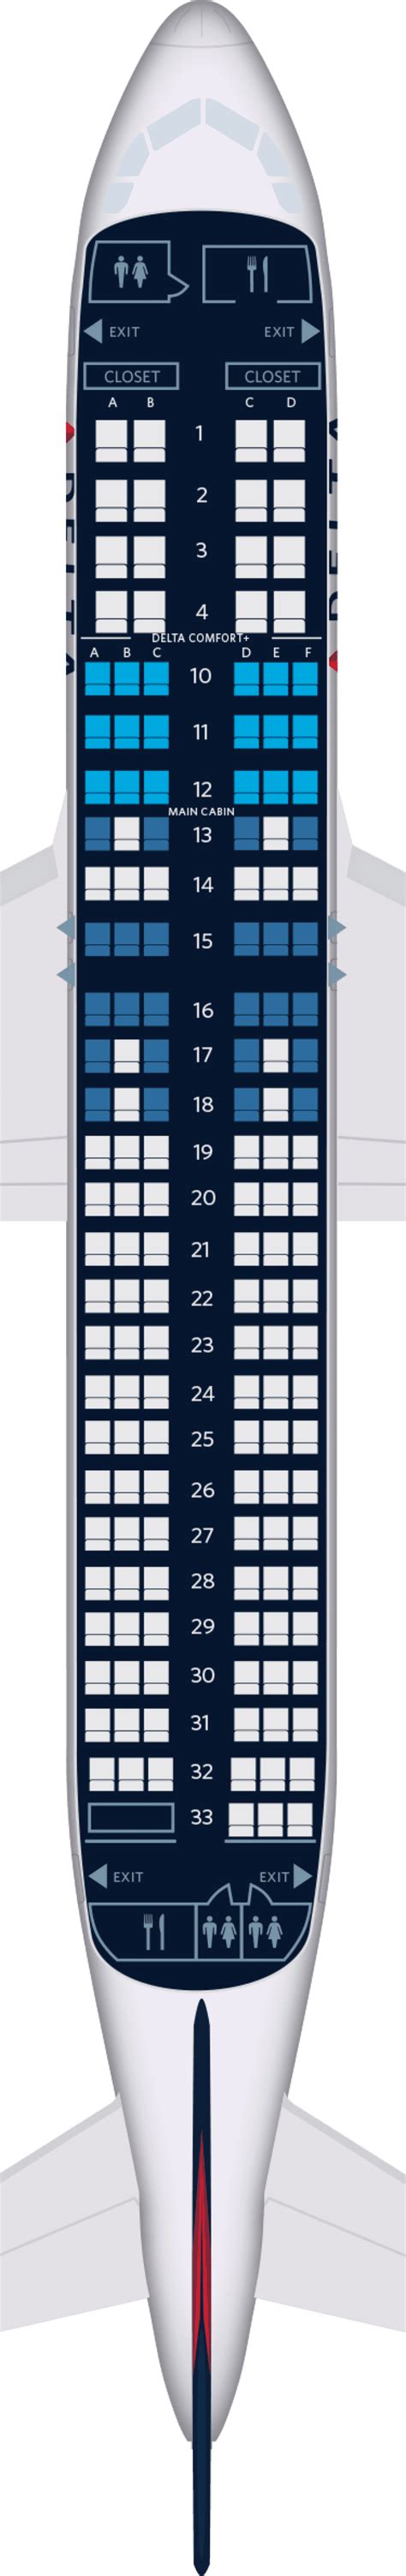 Airbus A320 Seat Maps Specs And Amenities Delta Air Lines